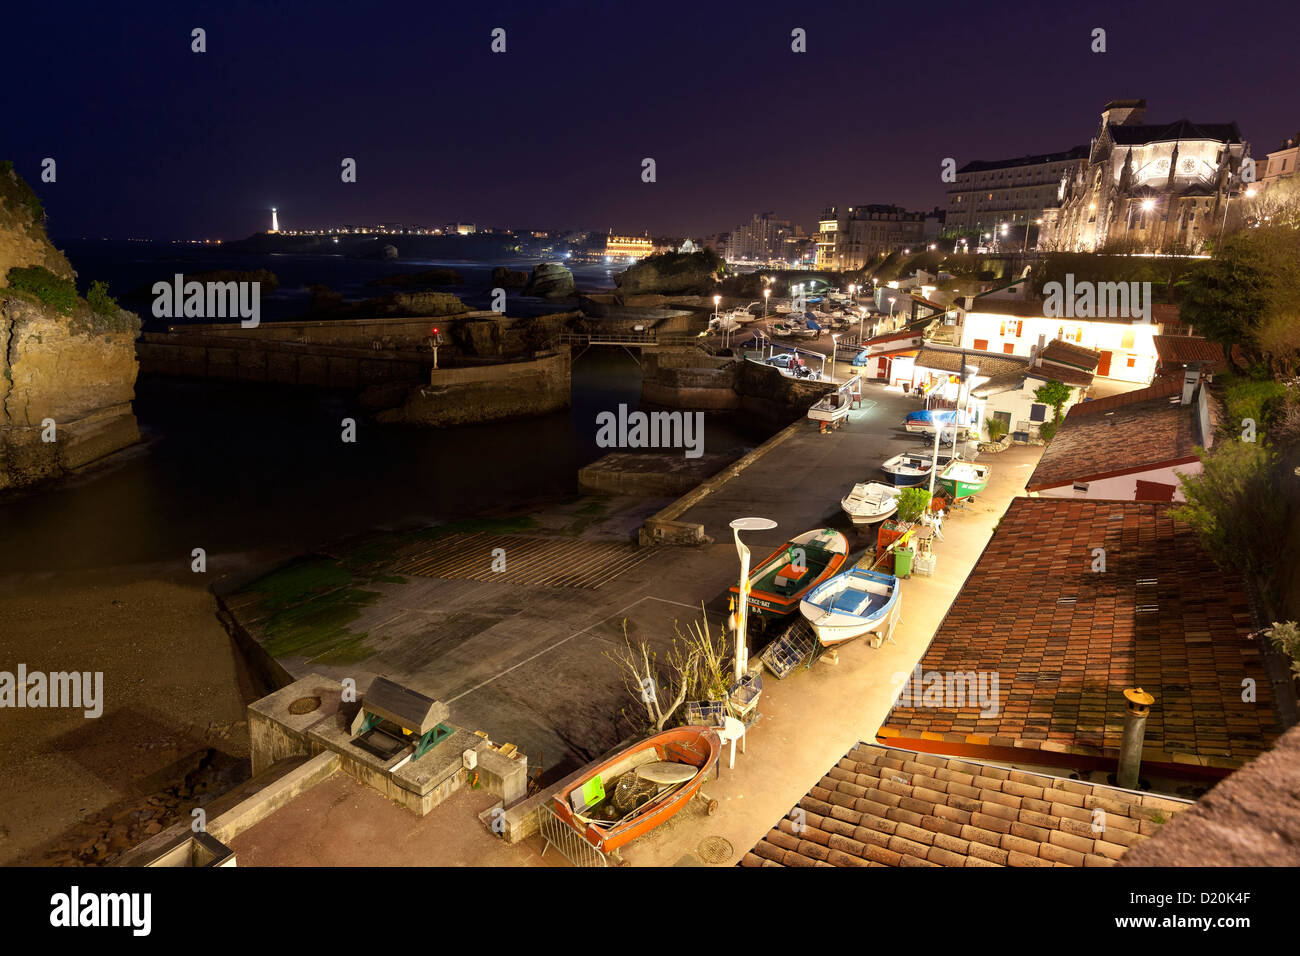 View of harbour in the evening, Port des pecheurs, Biarritz, Cote Basque, France, Europe Stock Photo